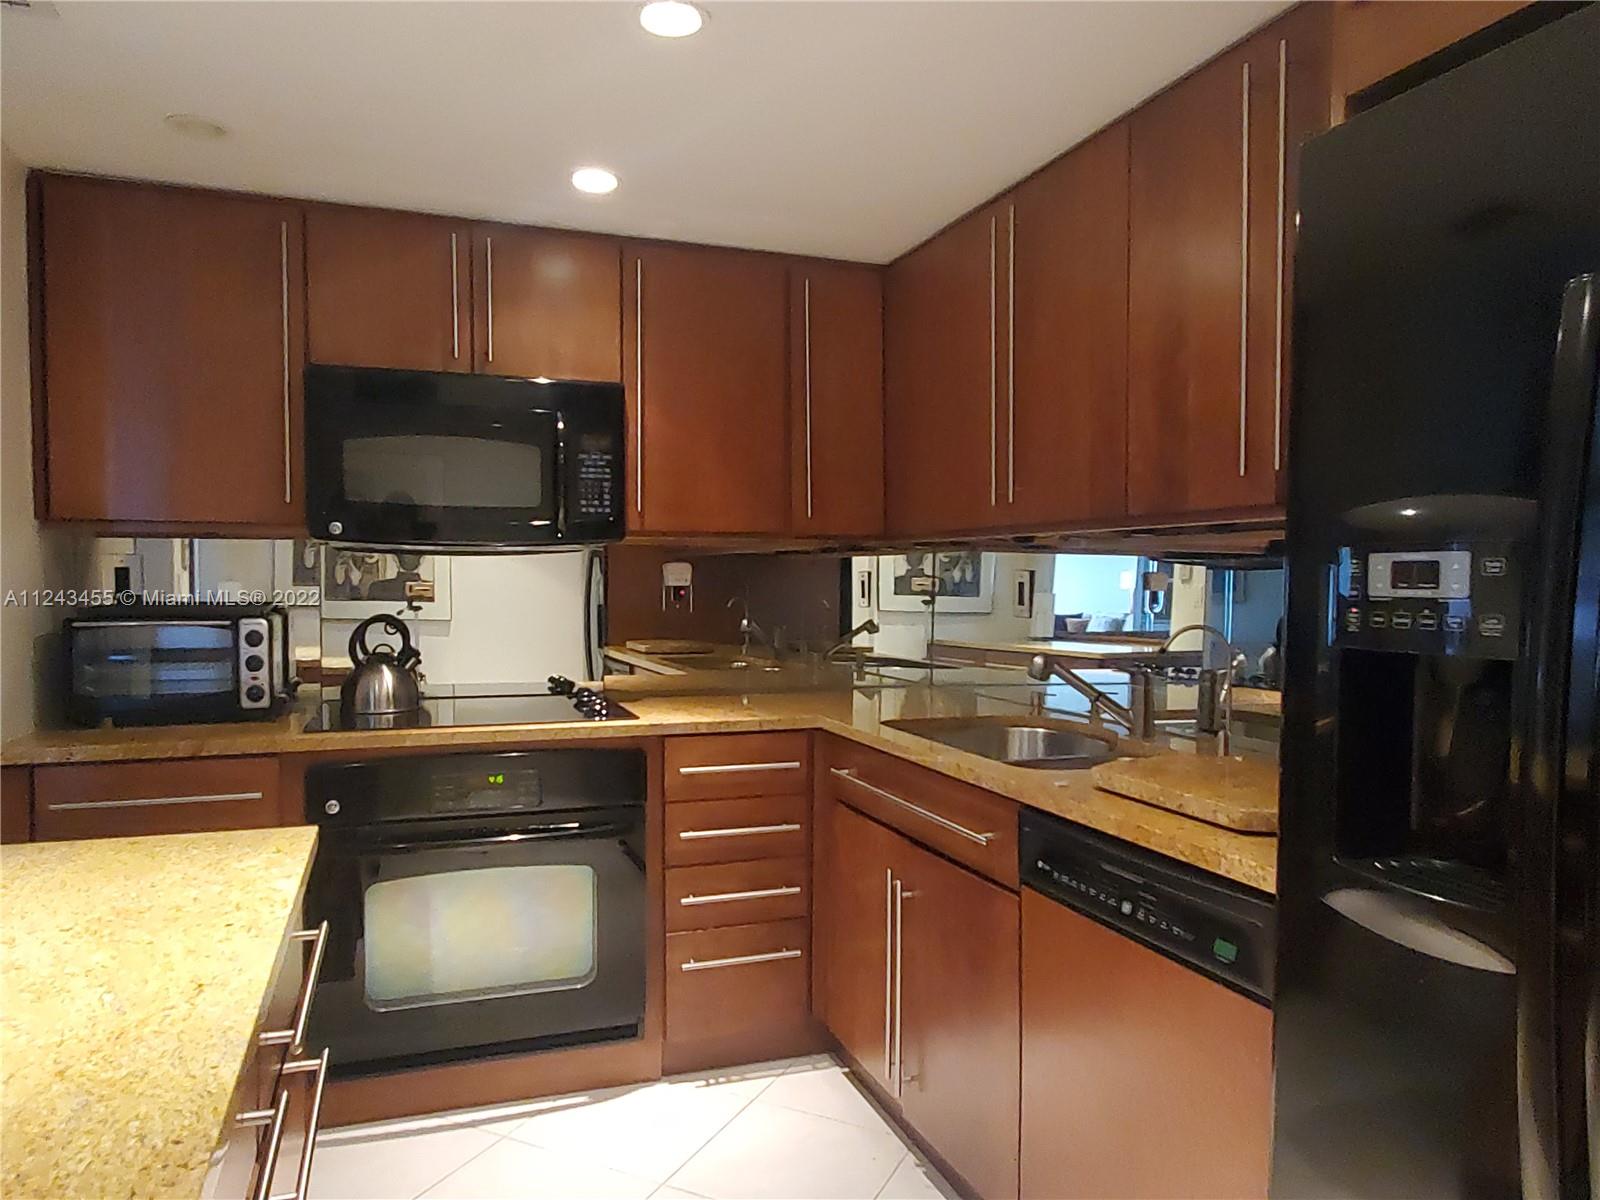 Offered furnished but will sell unfurnished, this 2 bed 2 bath 1312 sq. ft. unit overlooks the intercostal waterway. Amenities include a pool, hot tub, steam & sauna, and valet service. 1 in-building parking space & a storage room approx. 36x36x84.
With the maintenance, the 32-acre complex offers, cable/internet service, 24/7 security, state-of-the-art health spa/gym fitness center with professionally instructed classes, spinning, yoga, card playing rooms, 8 tennis & racket ball courts, basketball court, sauna and steam rooms, lap pool, children's playground, pet friendly with a spacious doggie park, and boat dock available. Miami Shores Country Golf Club (18-holes) within a 1/4 mile. 20-40 minutes from the Miami or Fort Lauderdale airports and Miami’s renowned South Beach community.